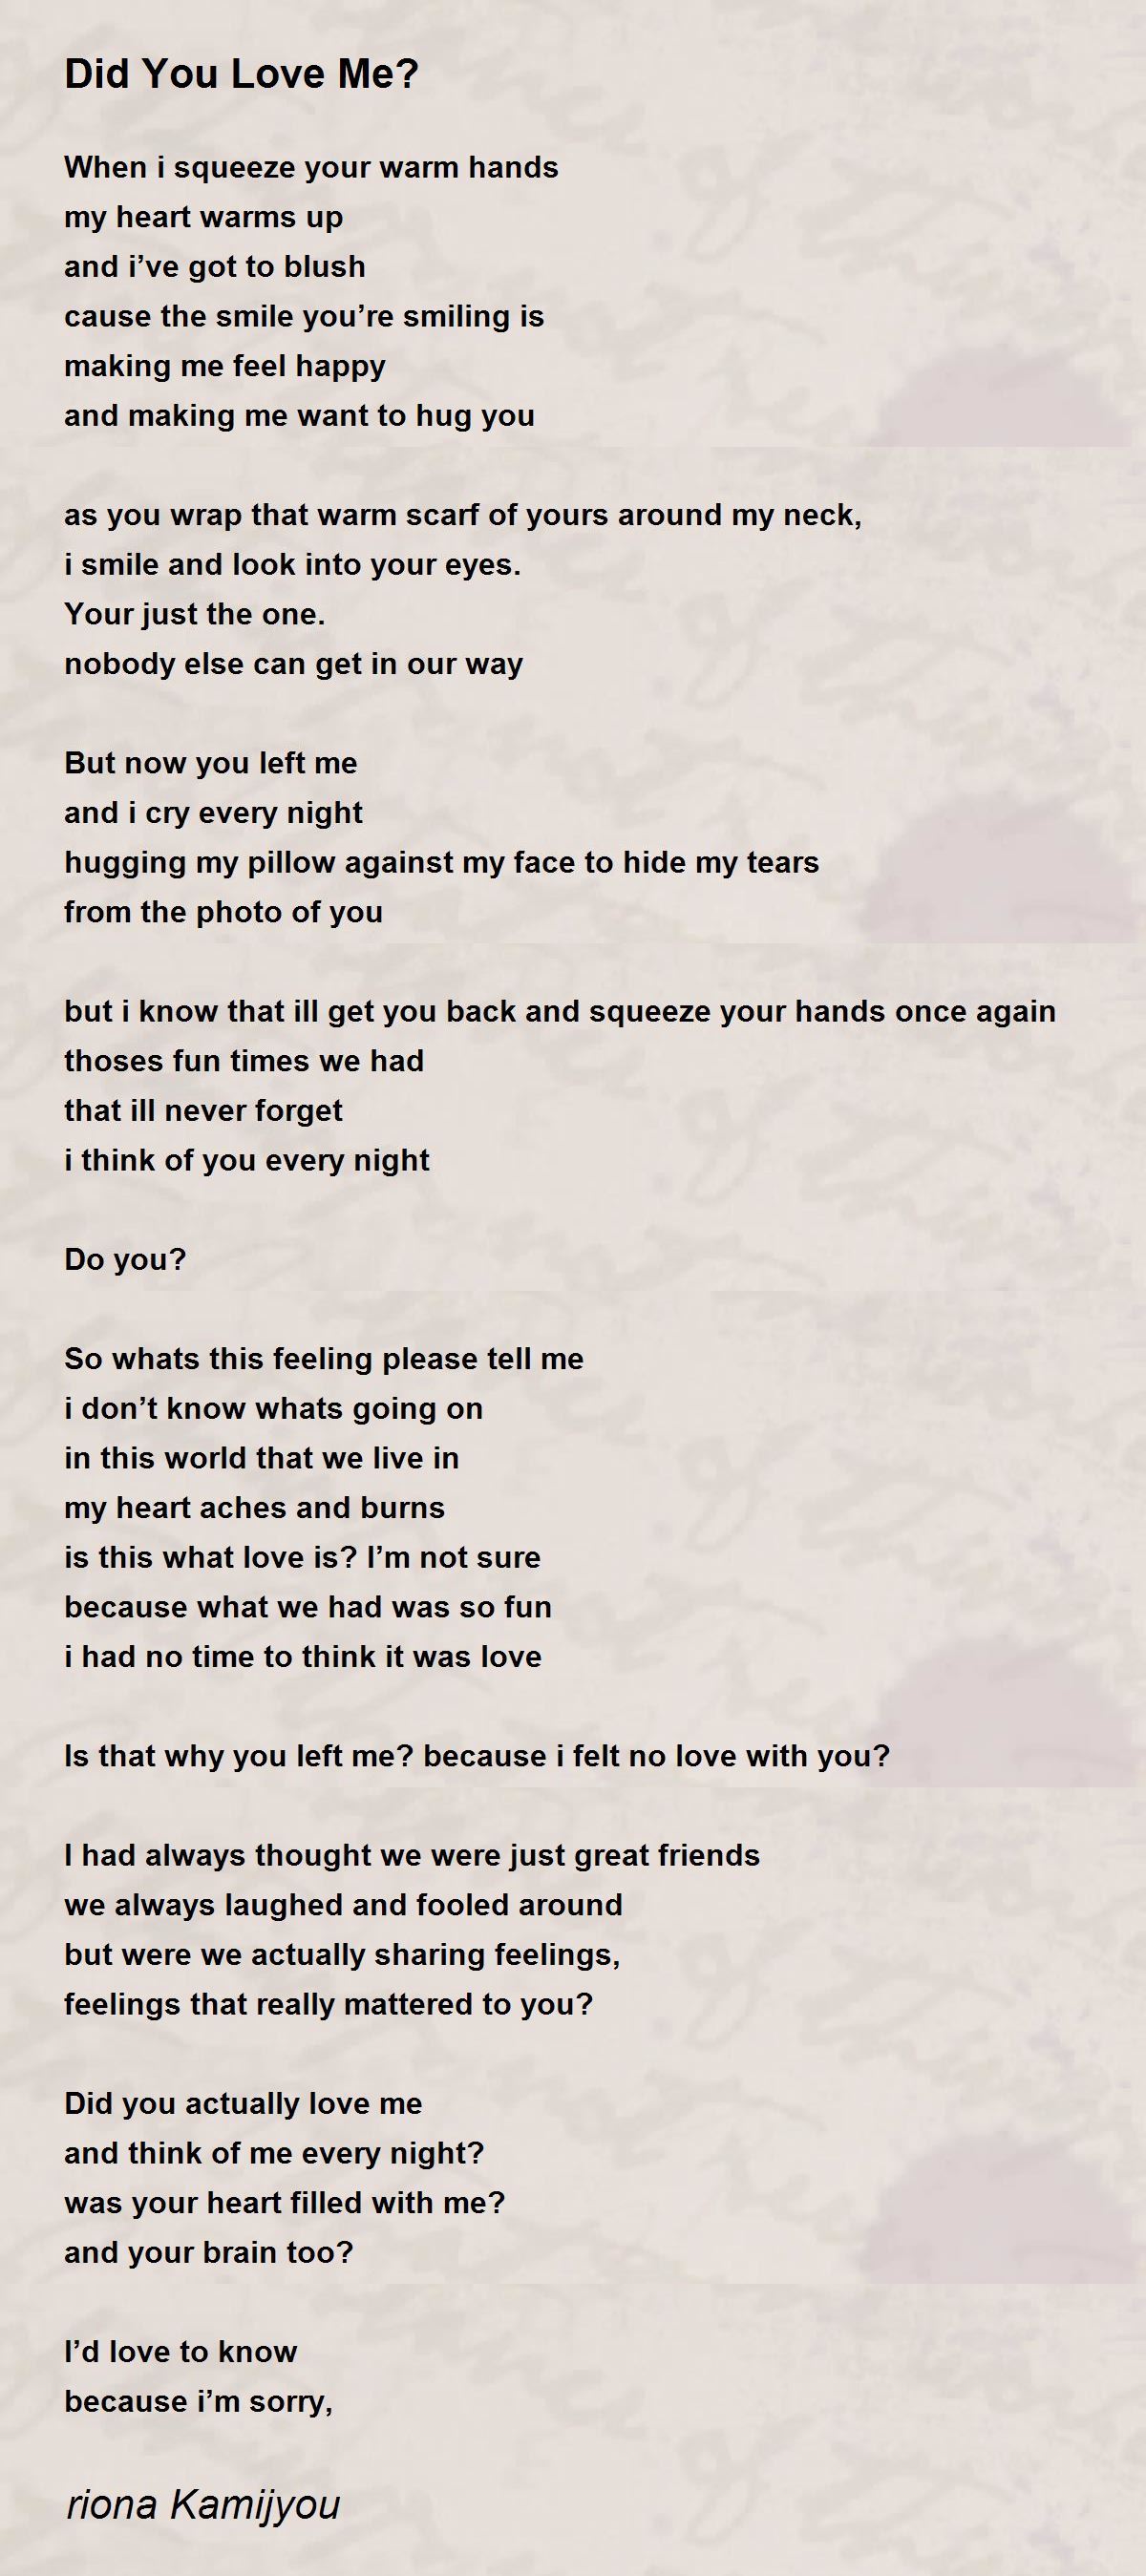 Did You Love Me? by riona Kamijyou - Did You Love Me? Poem